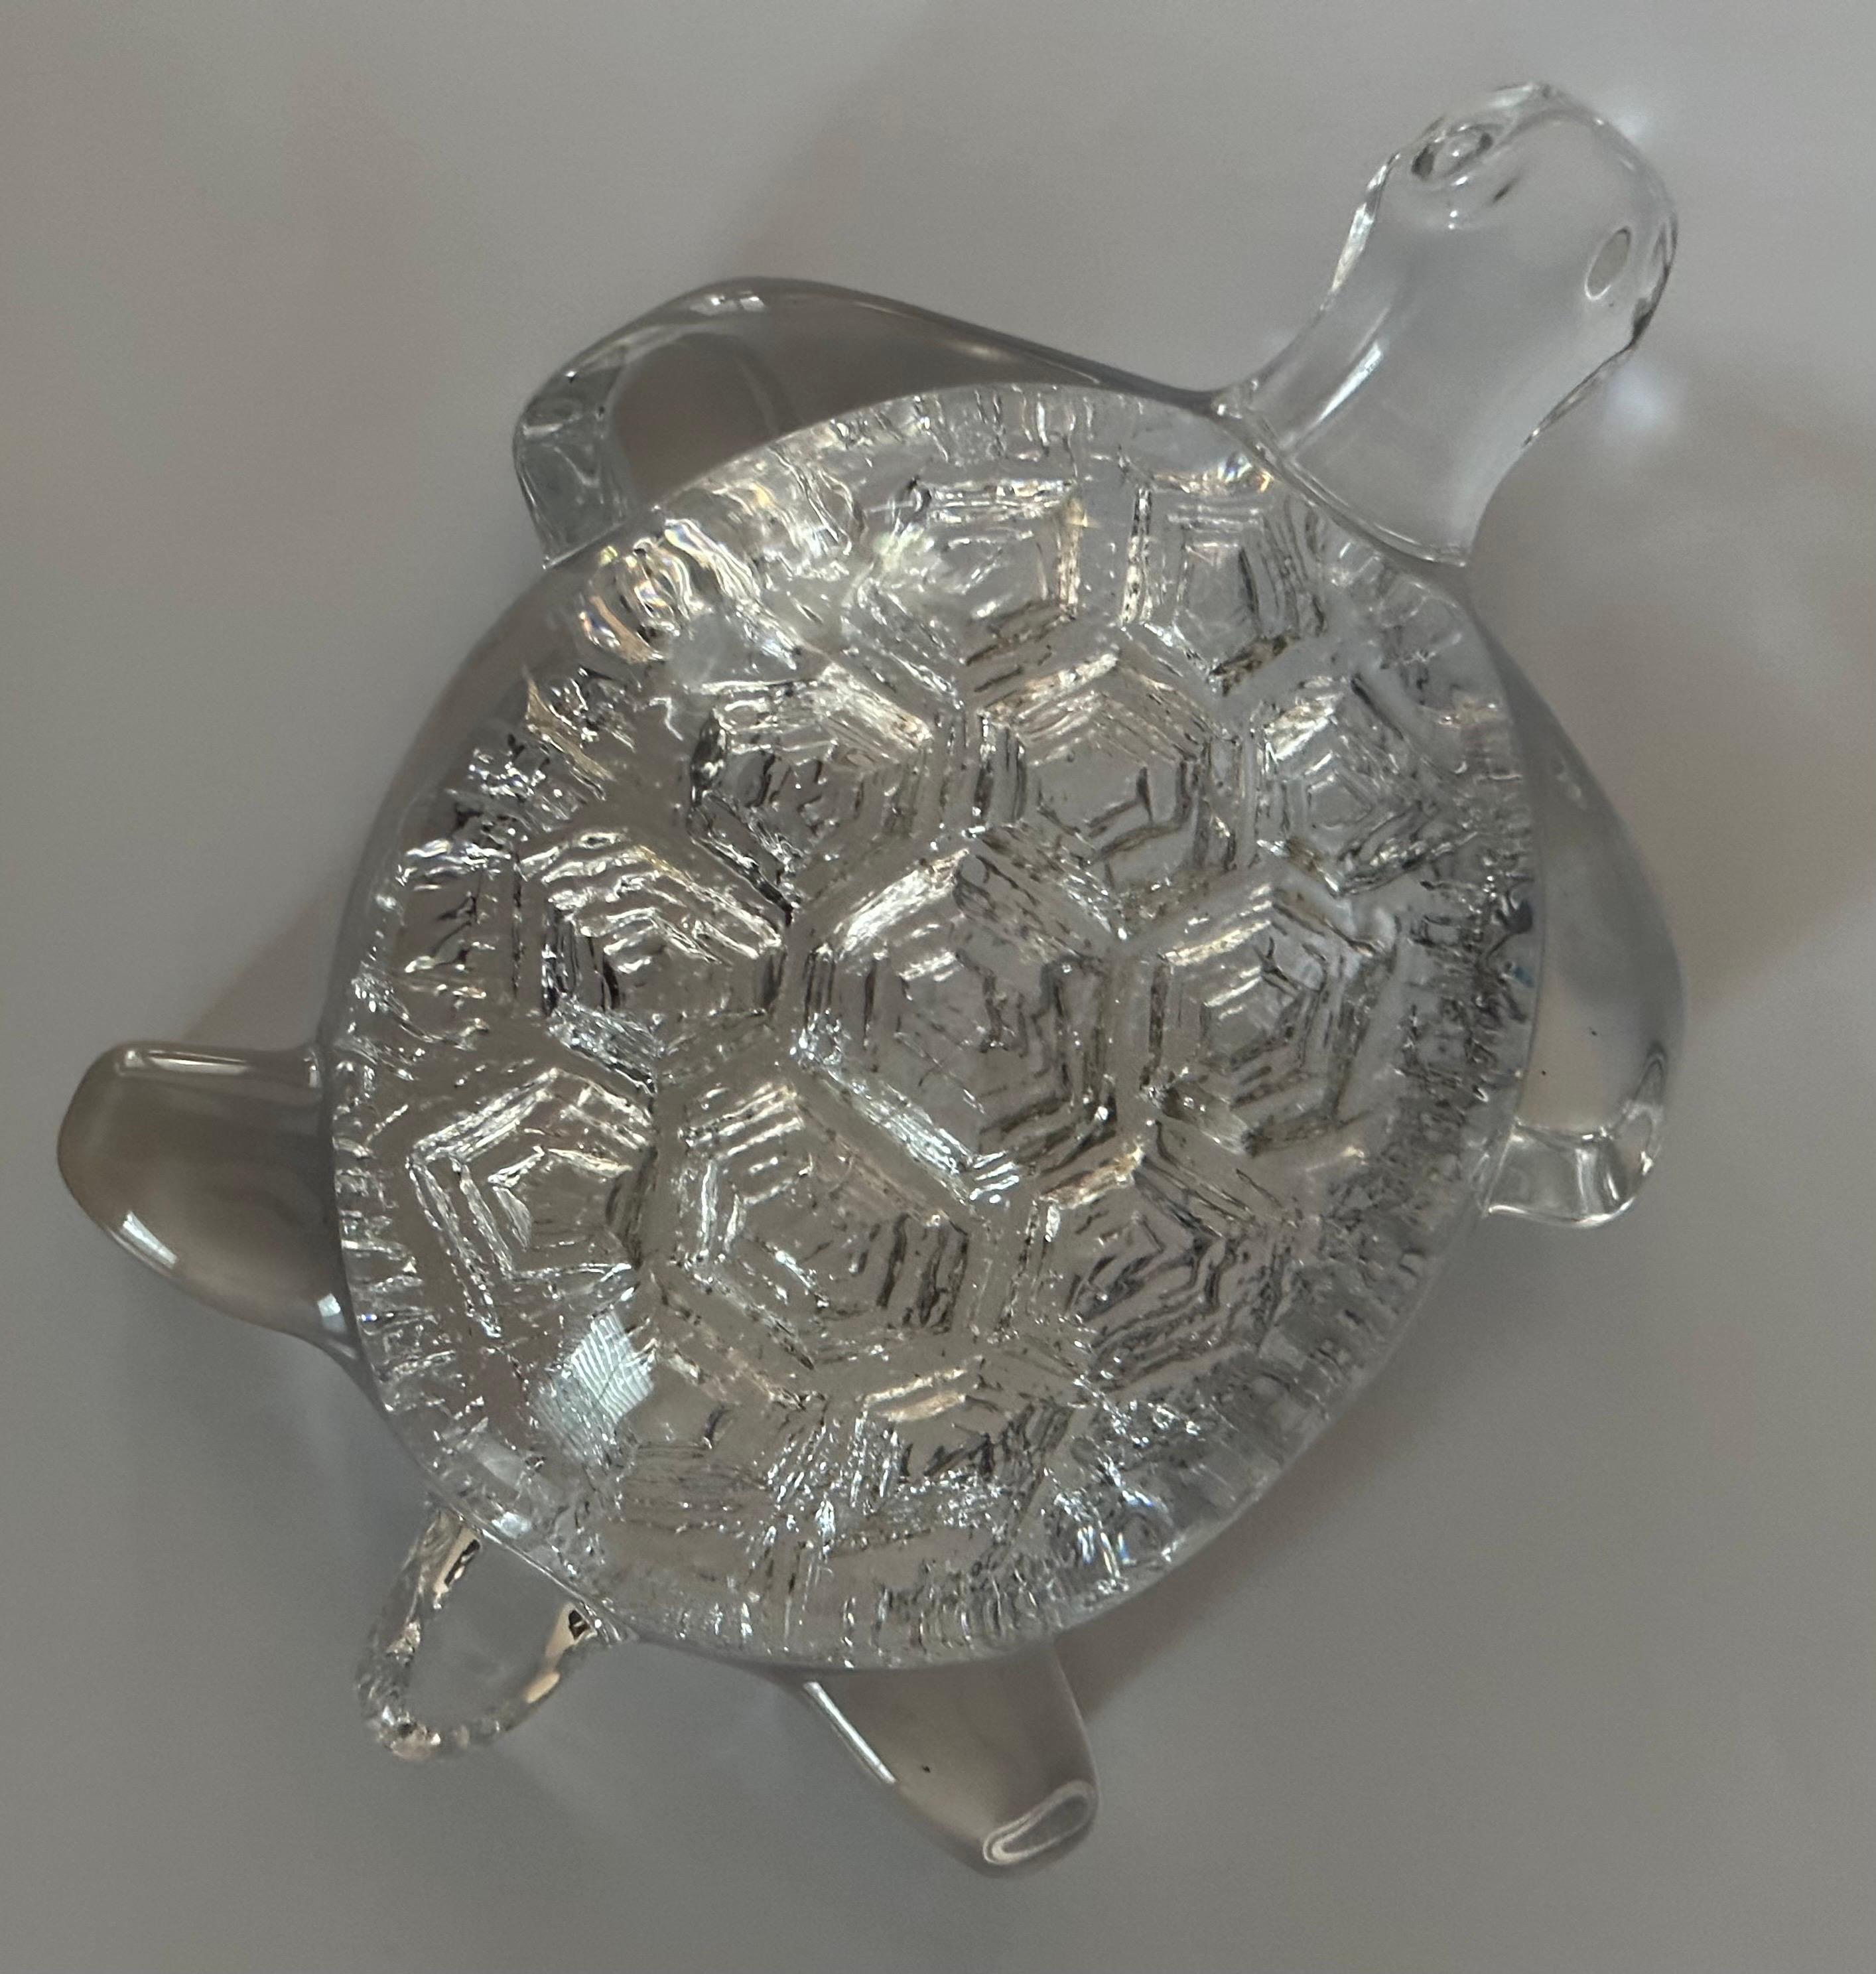 Stylized Crystal Turtle Sculpture / Paperweight by Daum France 2